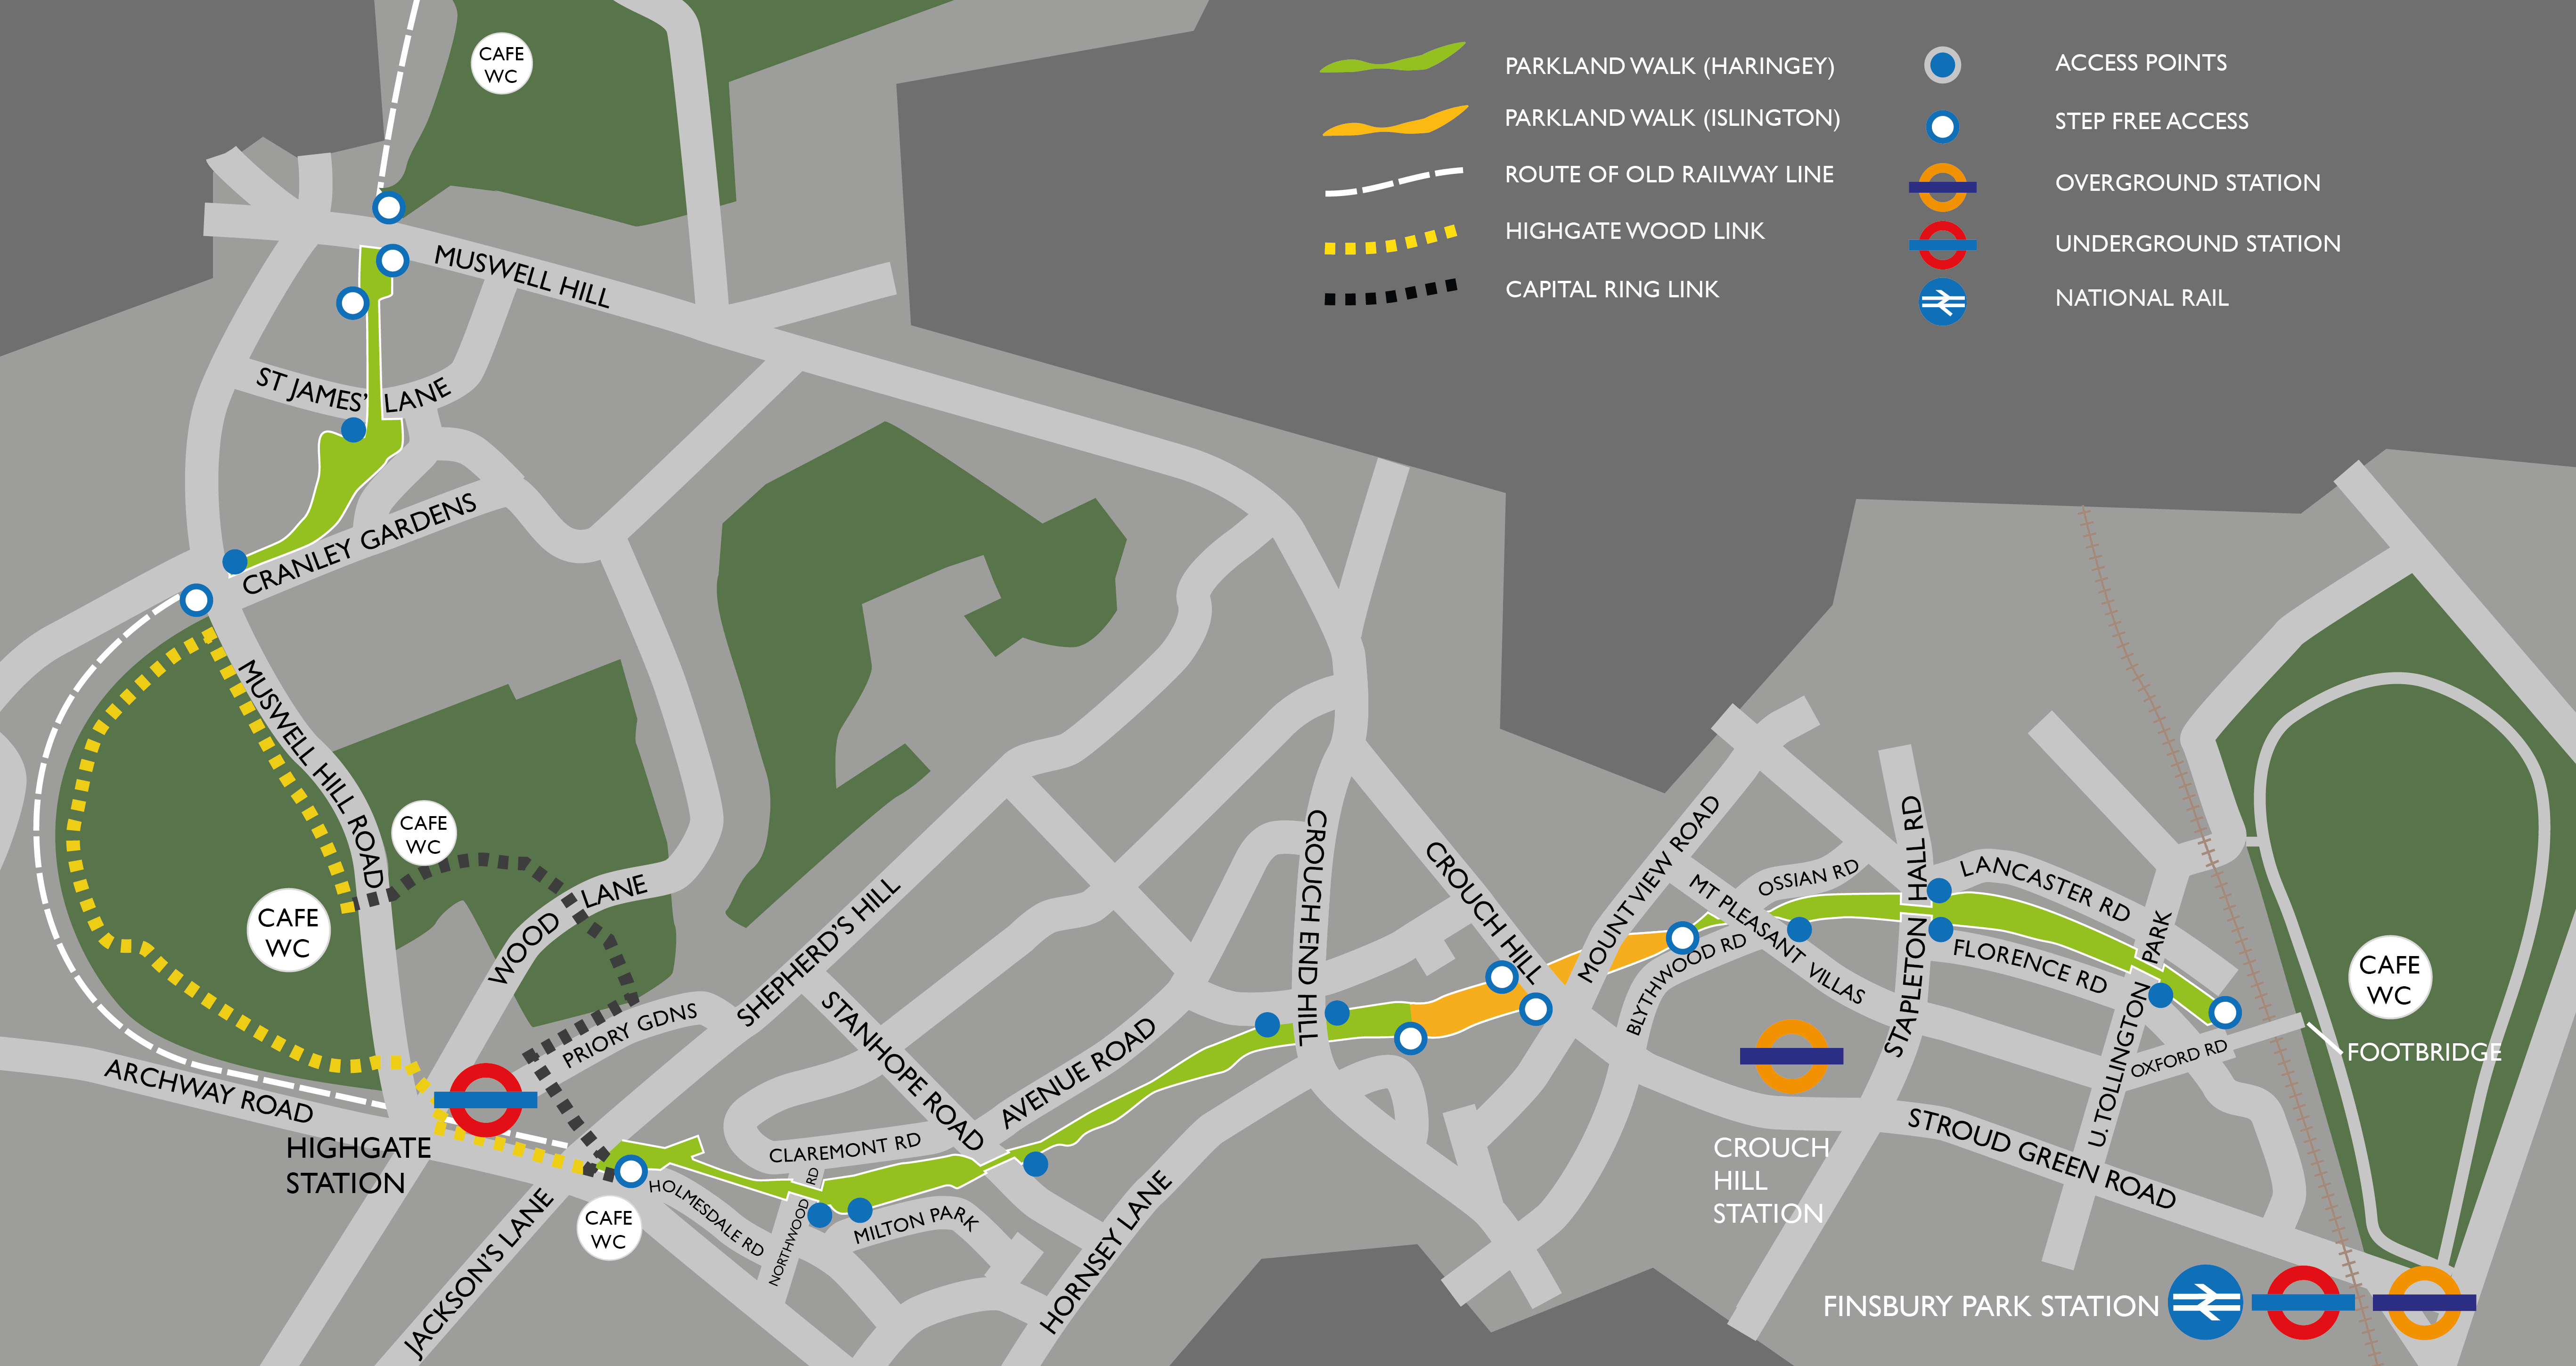 Map showing access points and public transport